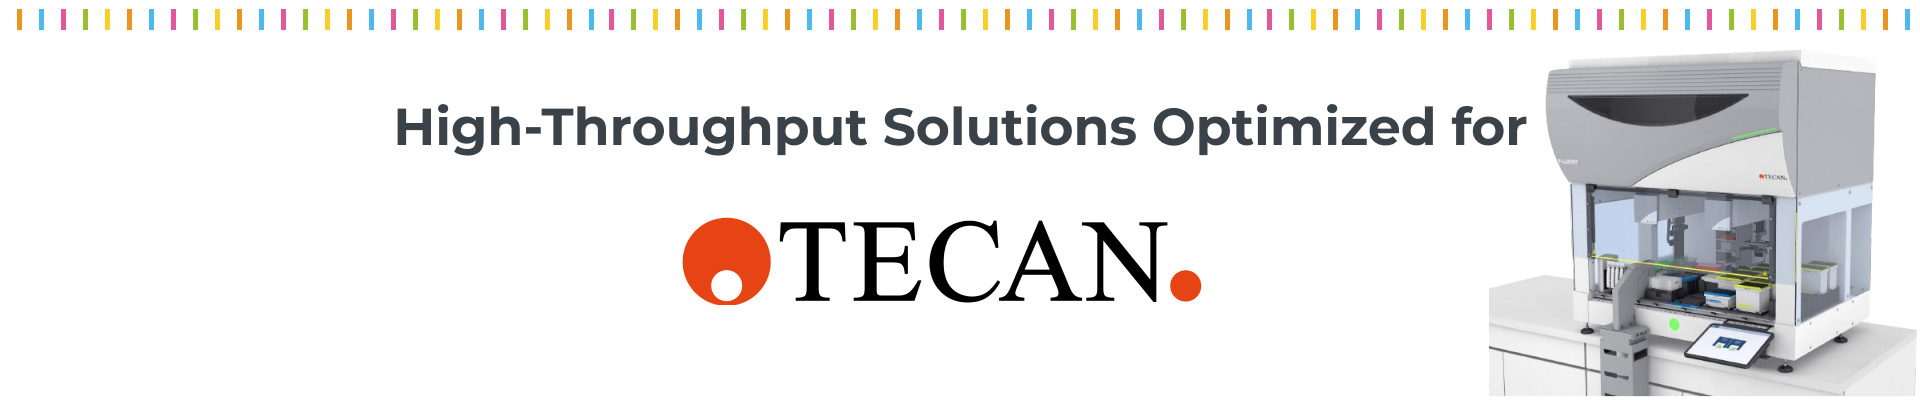 Banner for Tecan Automation